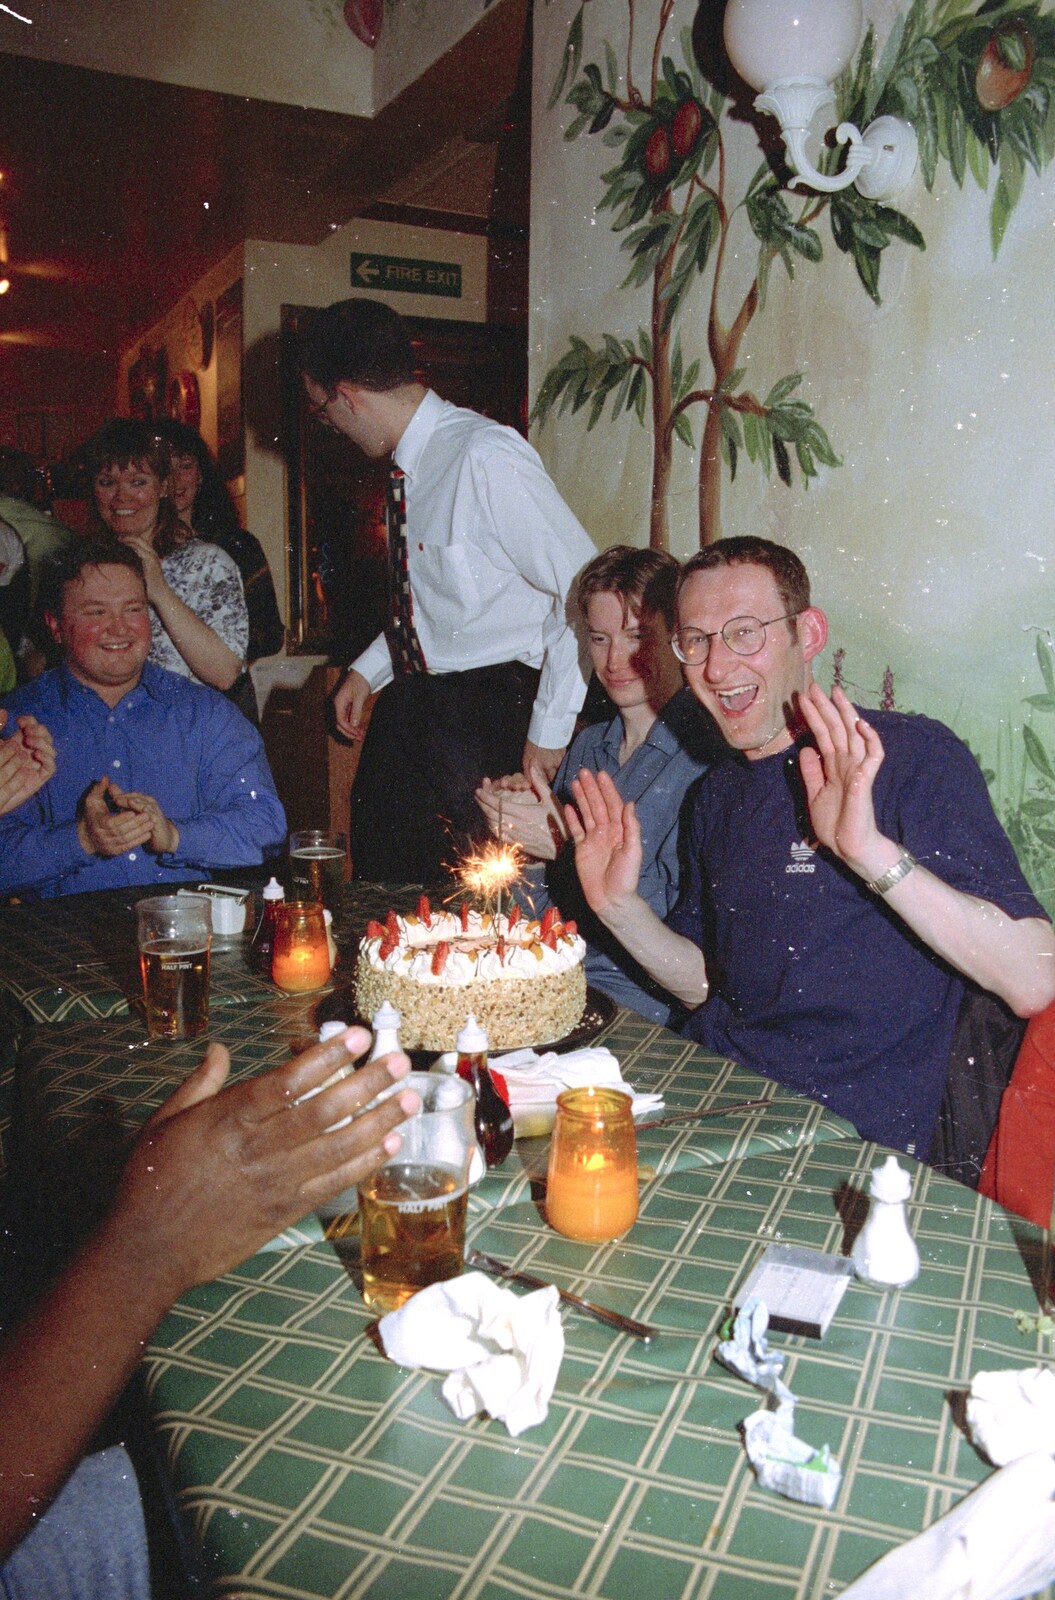 Dougie gets a sparkly birthday cake from Dougie's Birthday and Adrian Leaves CISU, Ipswich, Suffolk - 29th June 1997